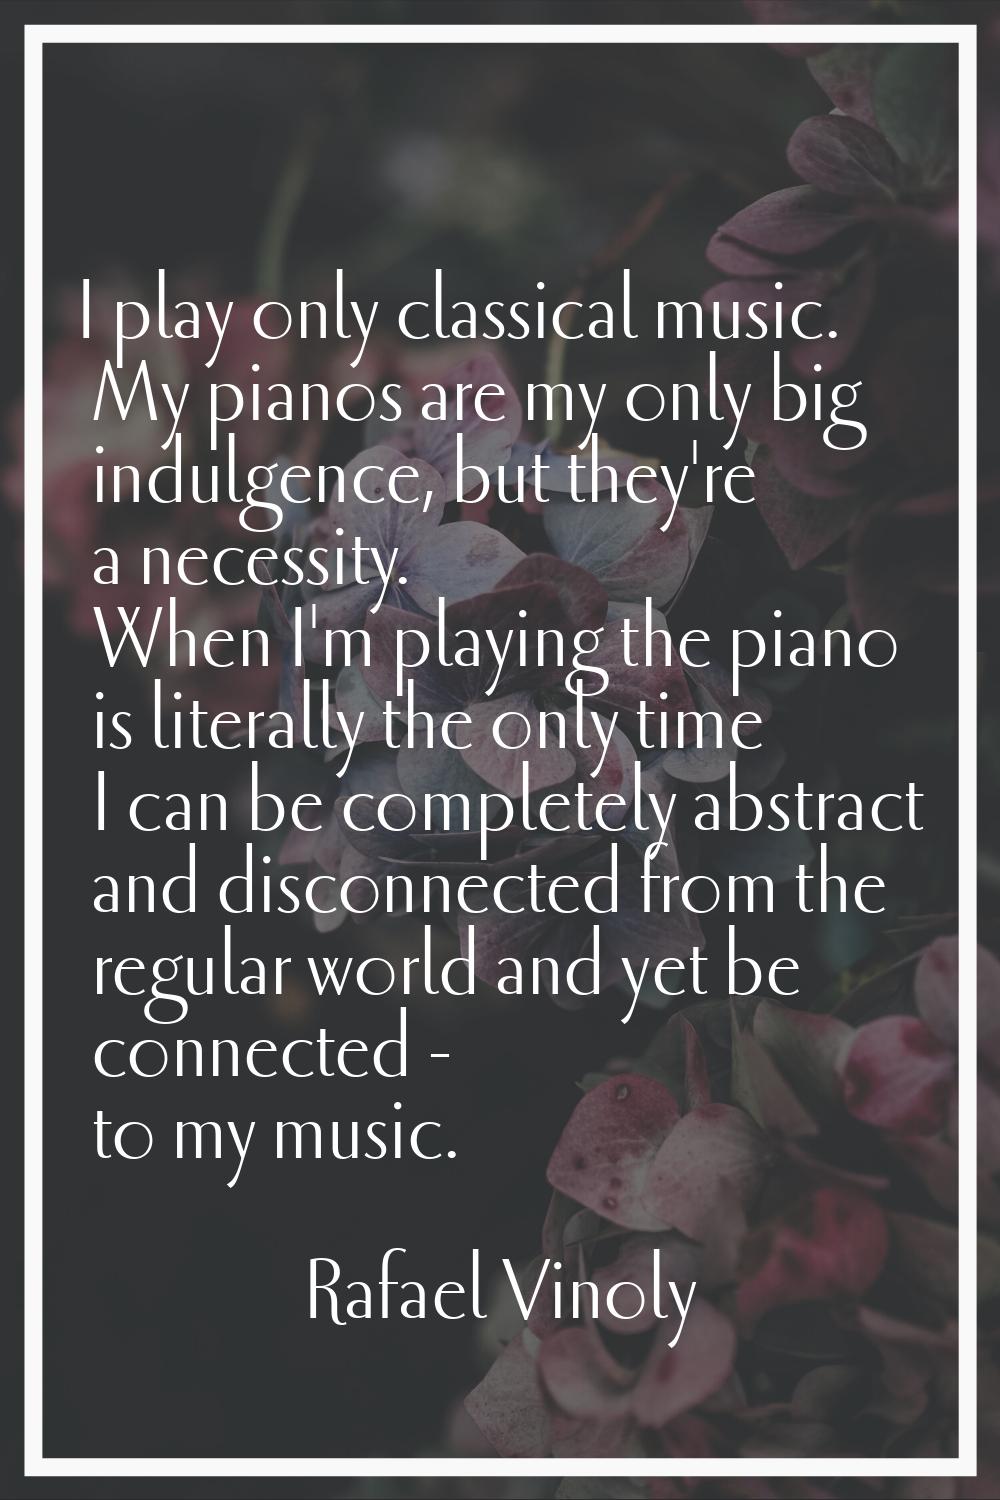 I play only classical music. My pianos are my only big indulgence, but they're a necessity. When I'